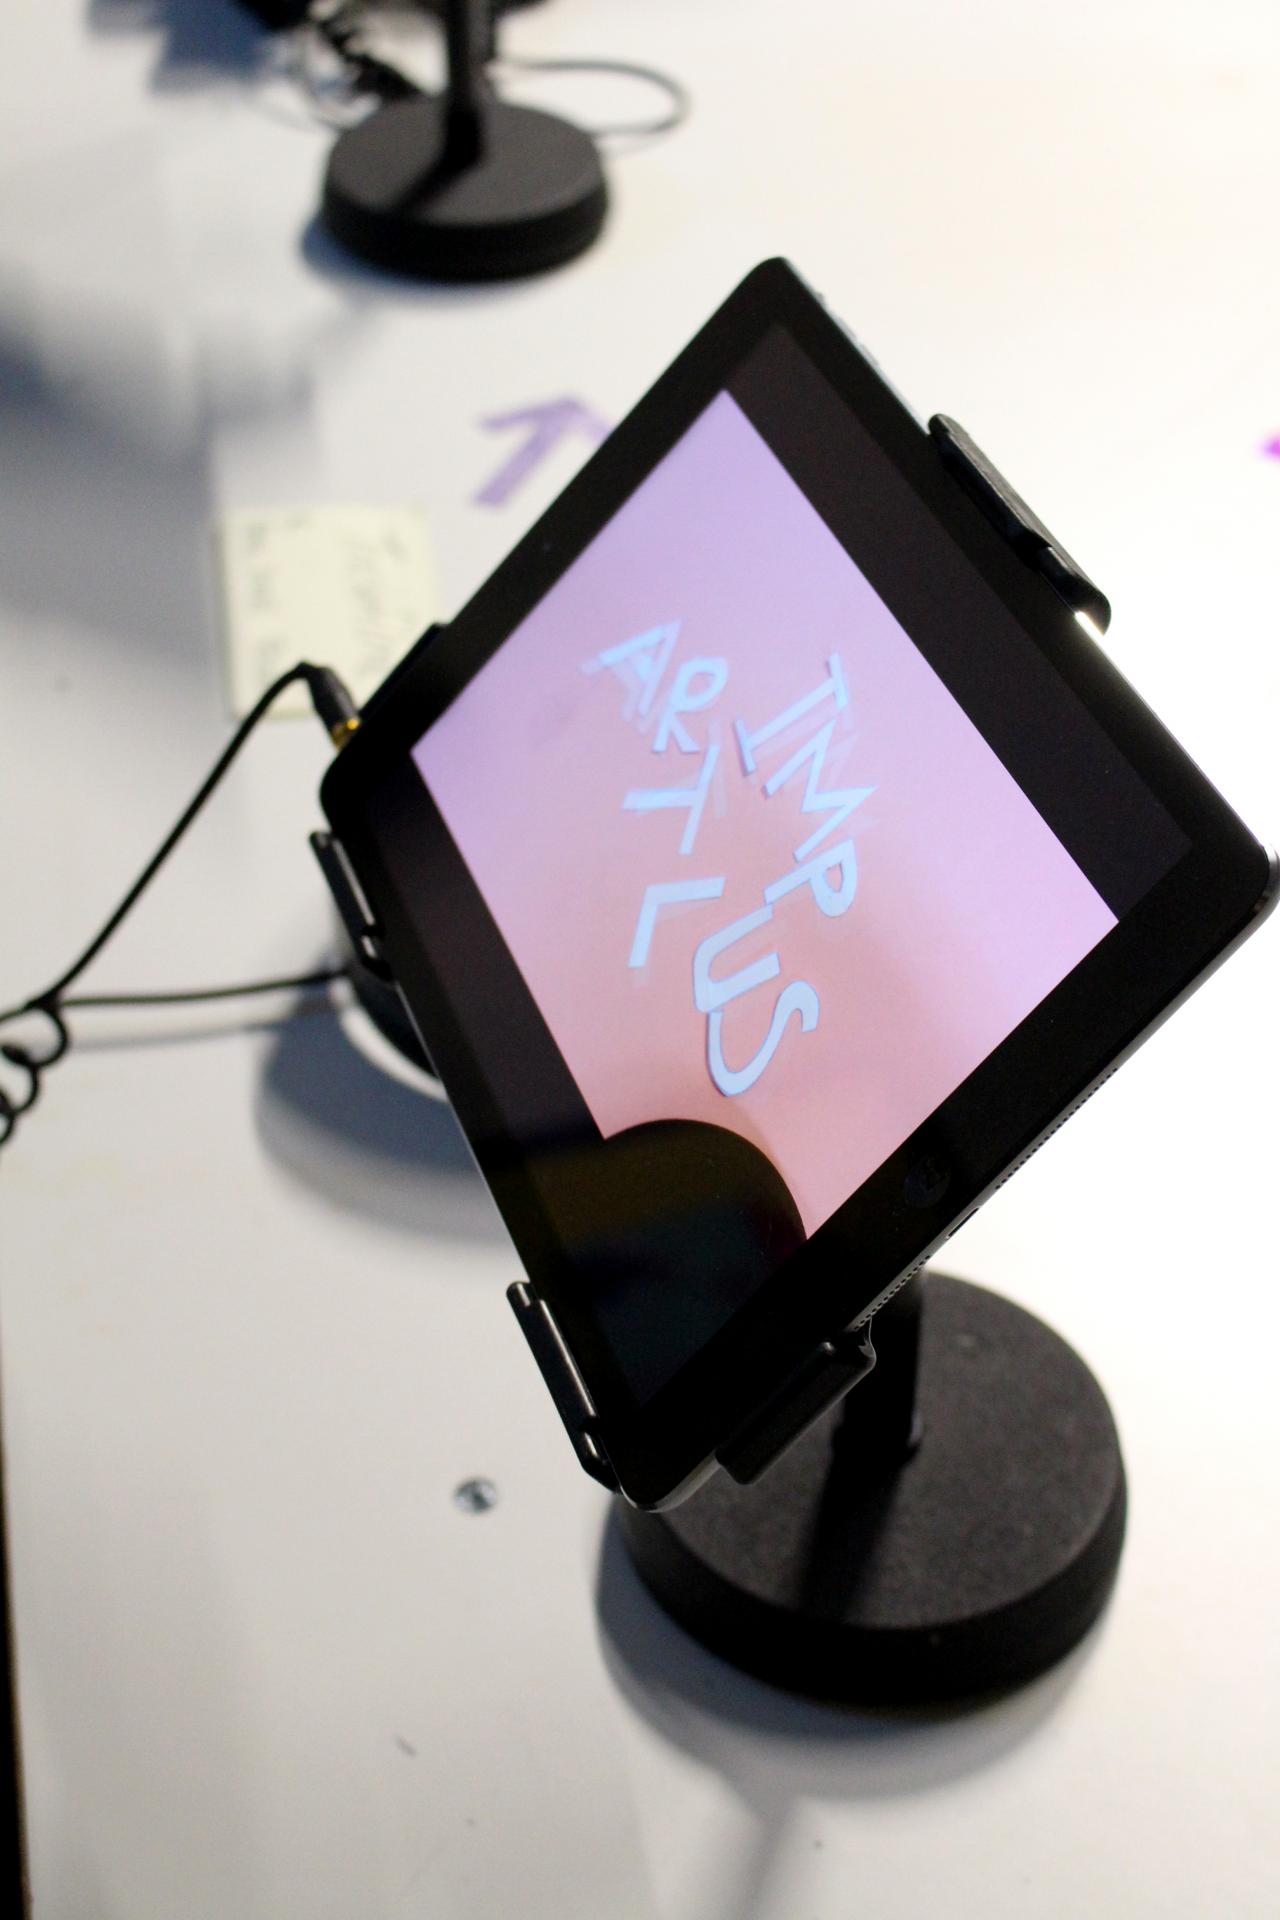 A photo of an iPad in the context of the event »Art im Puls«.